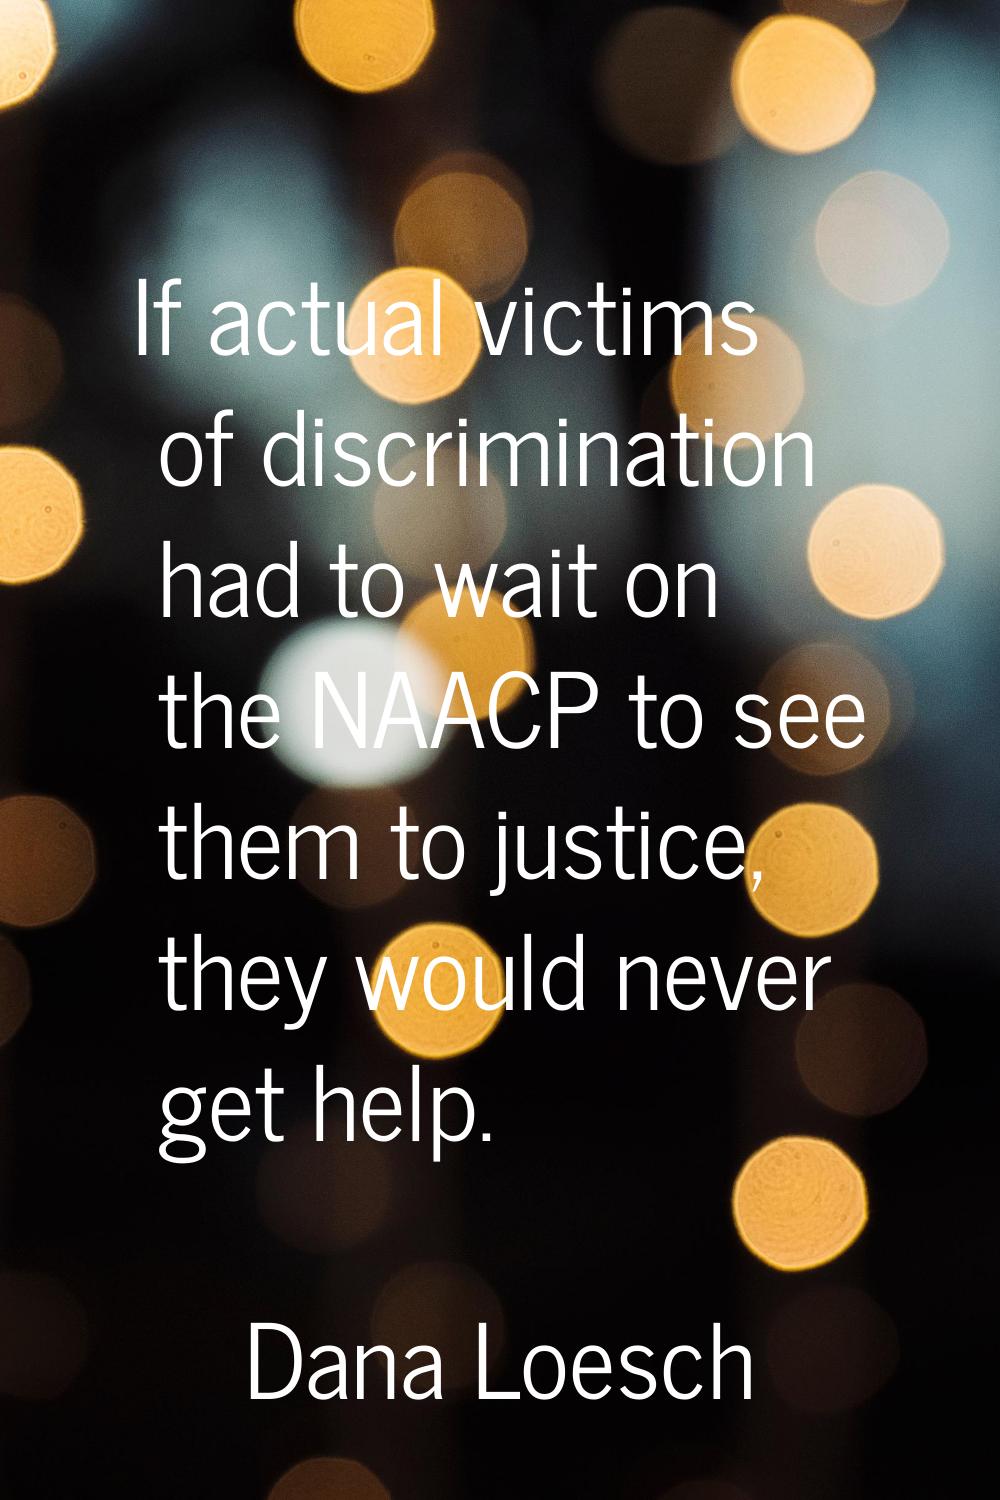 If actual victims of discrimination had to wait on the NAACP to see them to justice, they would nev